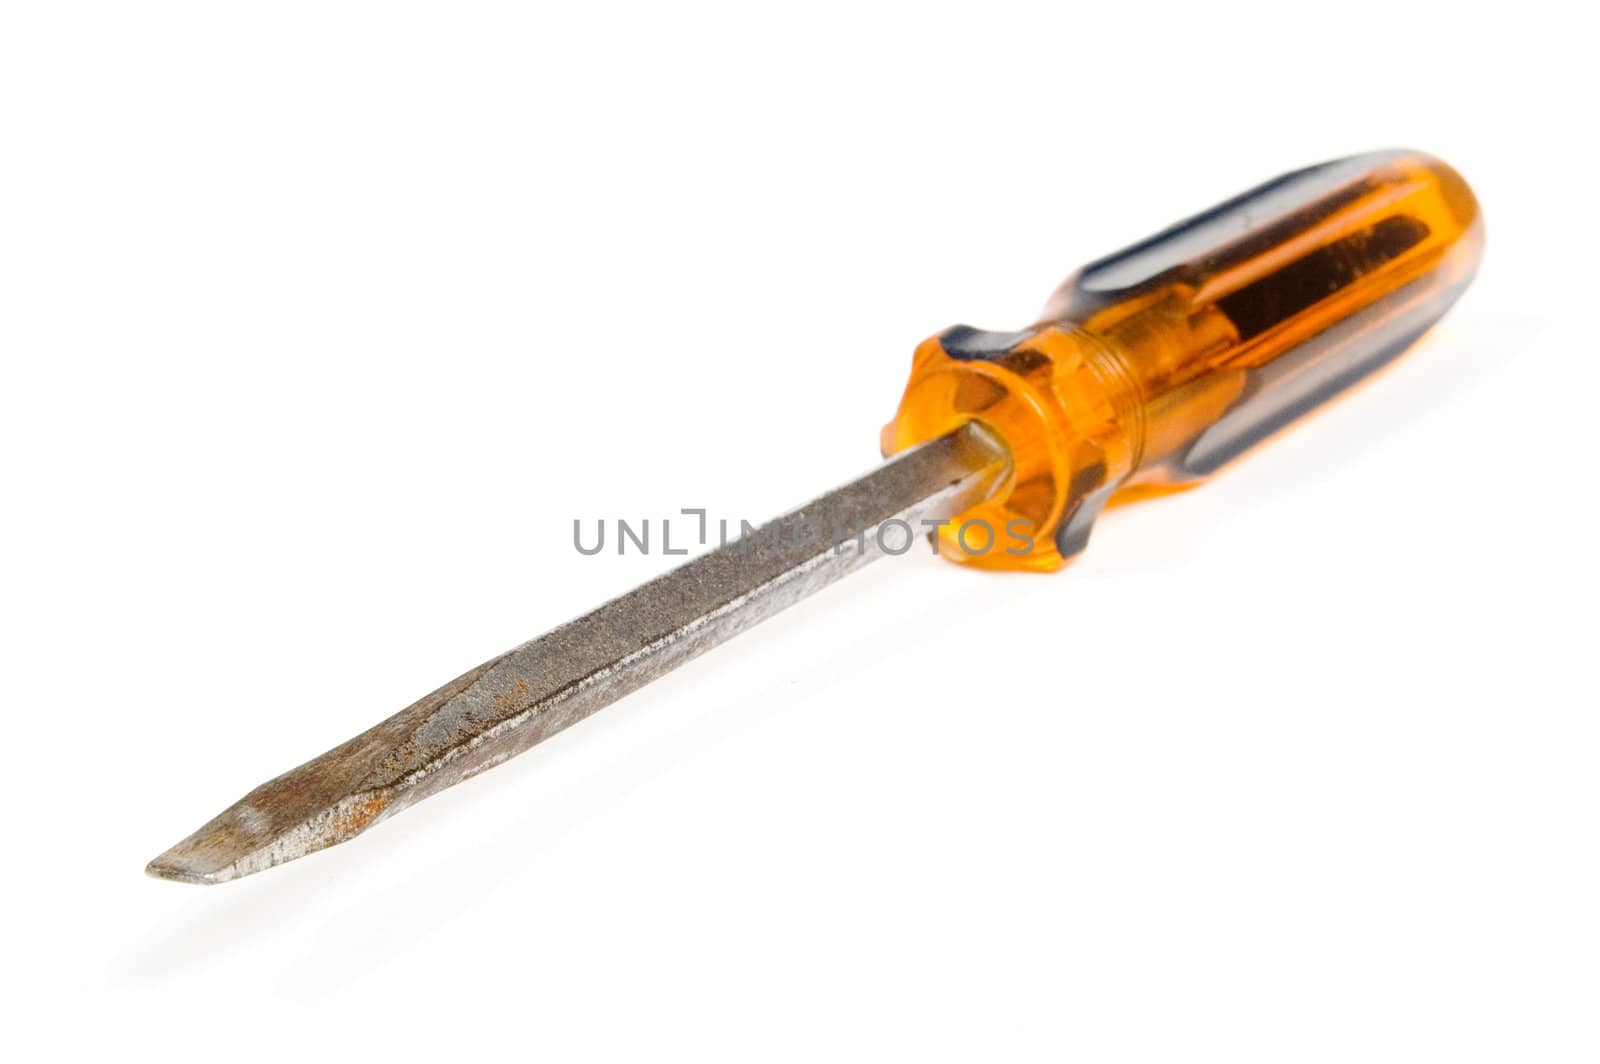 Photo of single screwdriver against the white background by ladyminnie